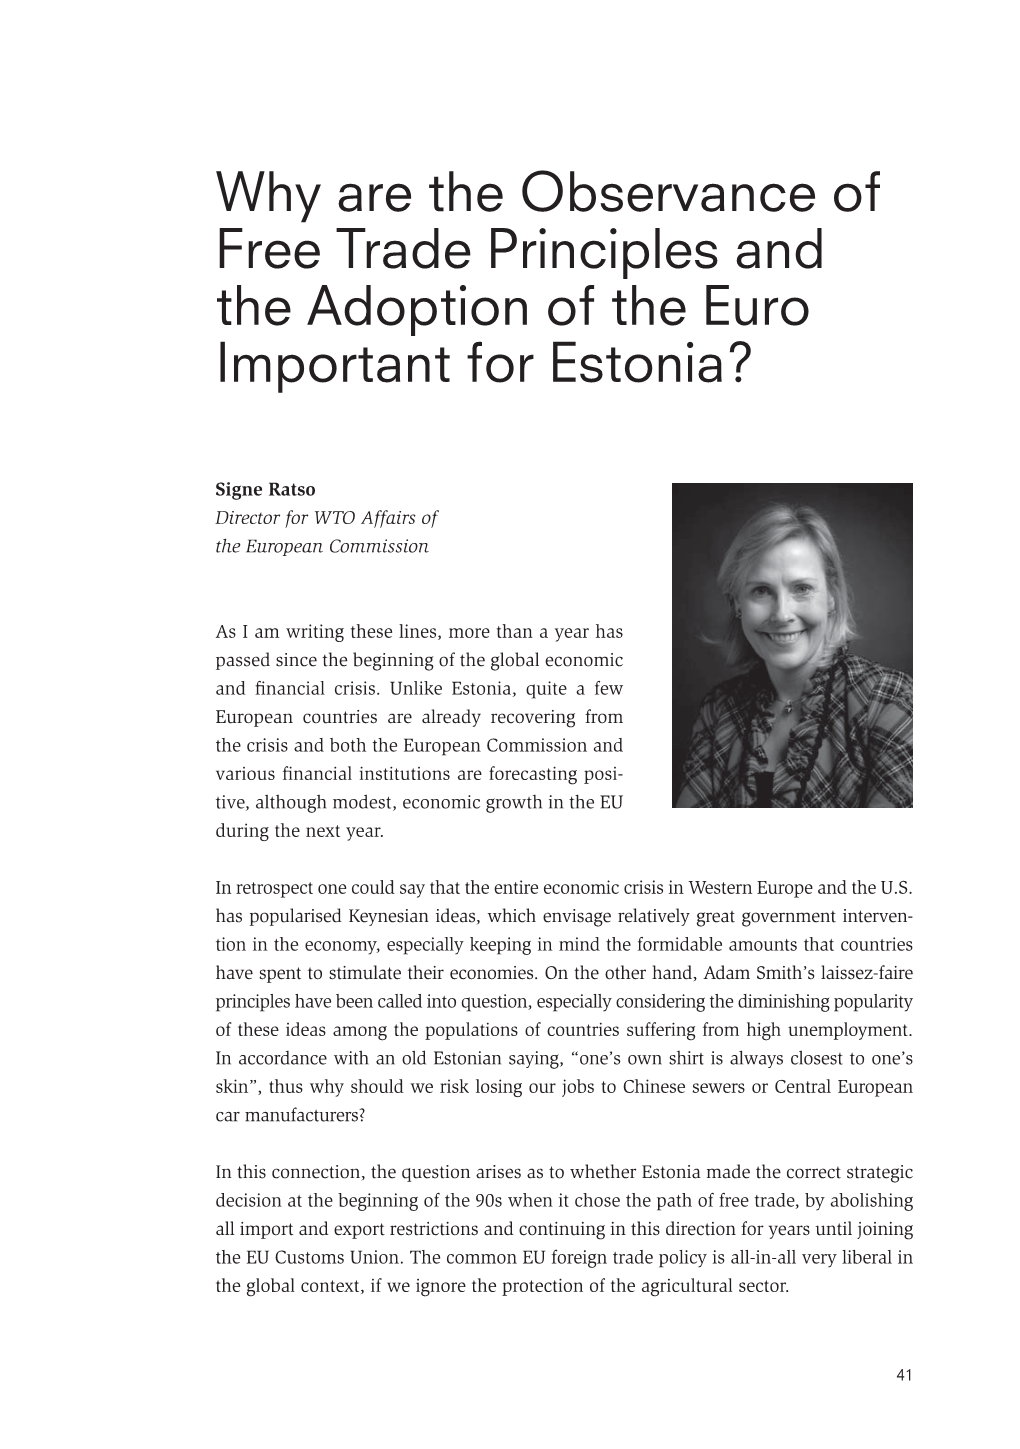 Why Are the Observance of Free Trade Principles and the Adoption of the Euro Important for Estonia?